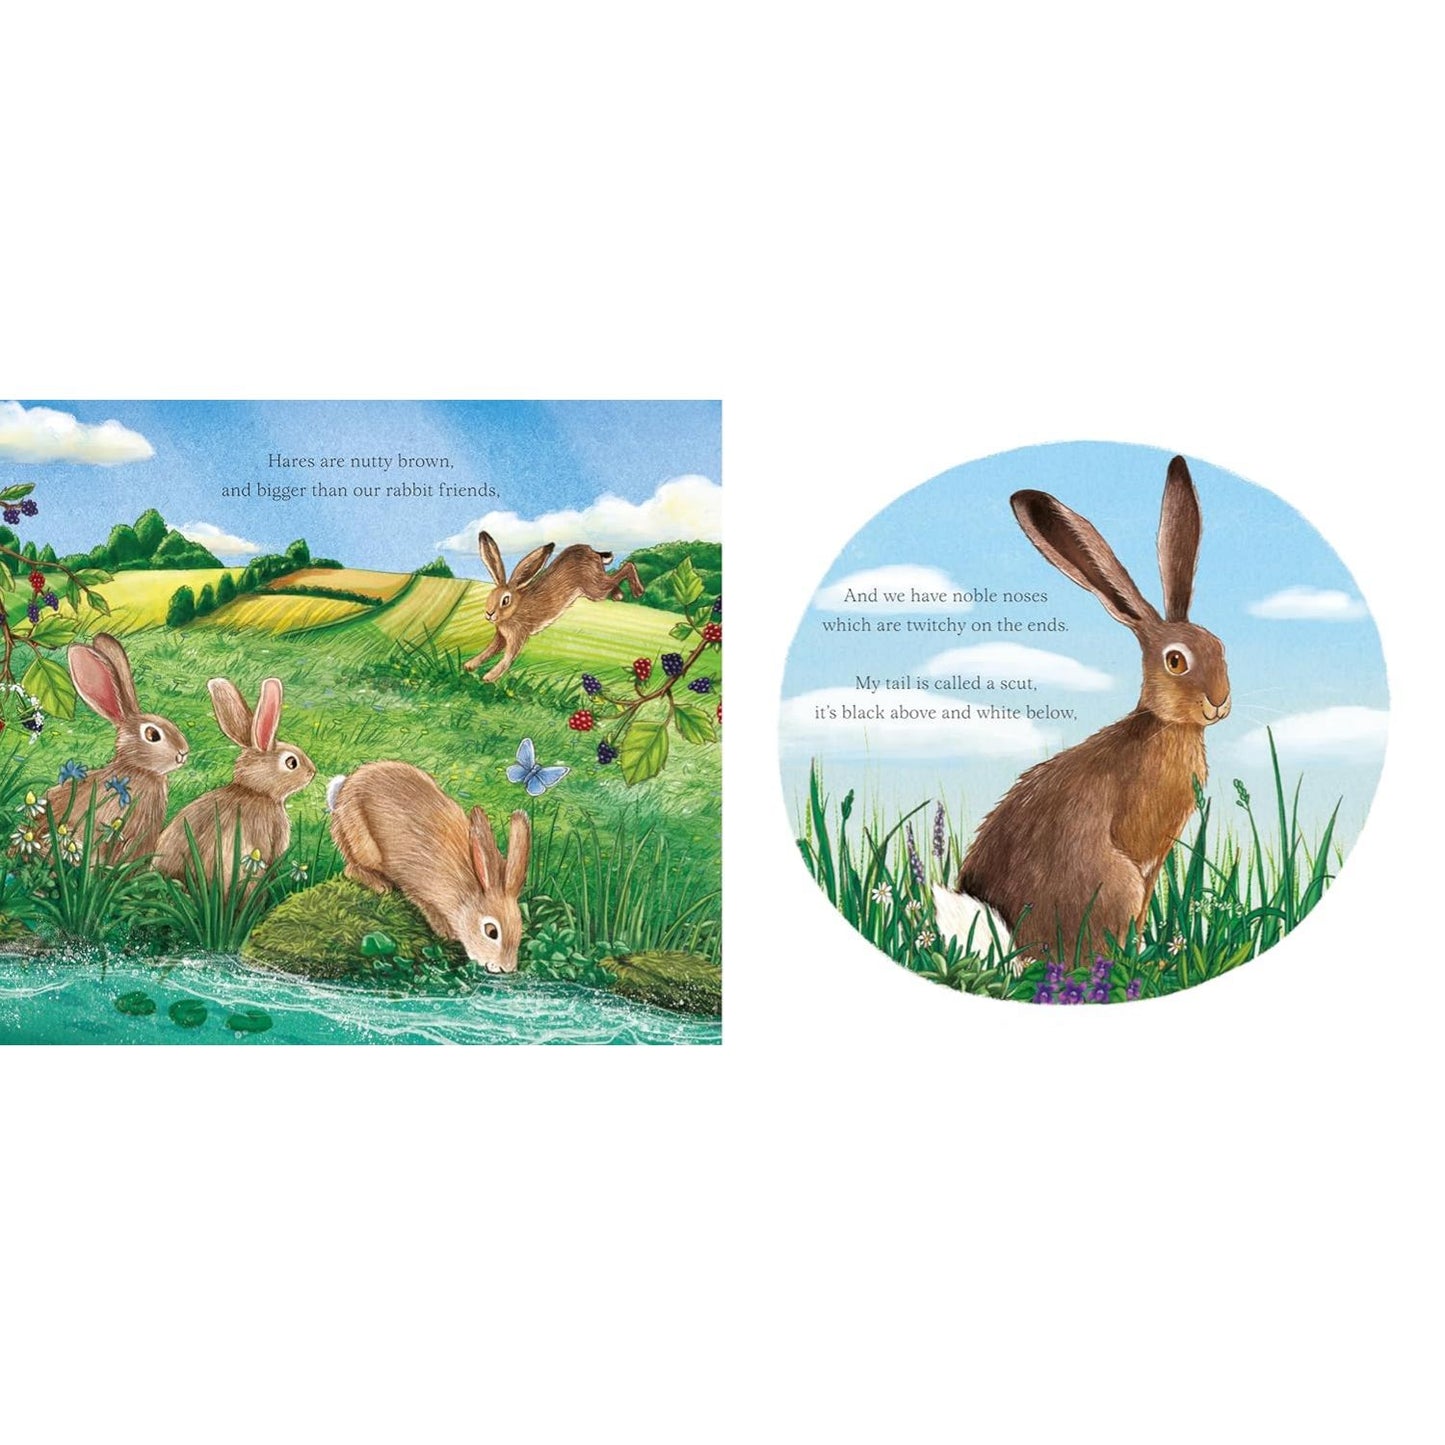 I am Hattie the Hare: A Tale from Our Wild and Wonderful Meadows | Hardcover | Children’s Book on Nature